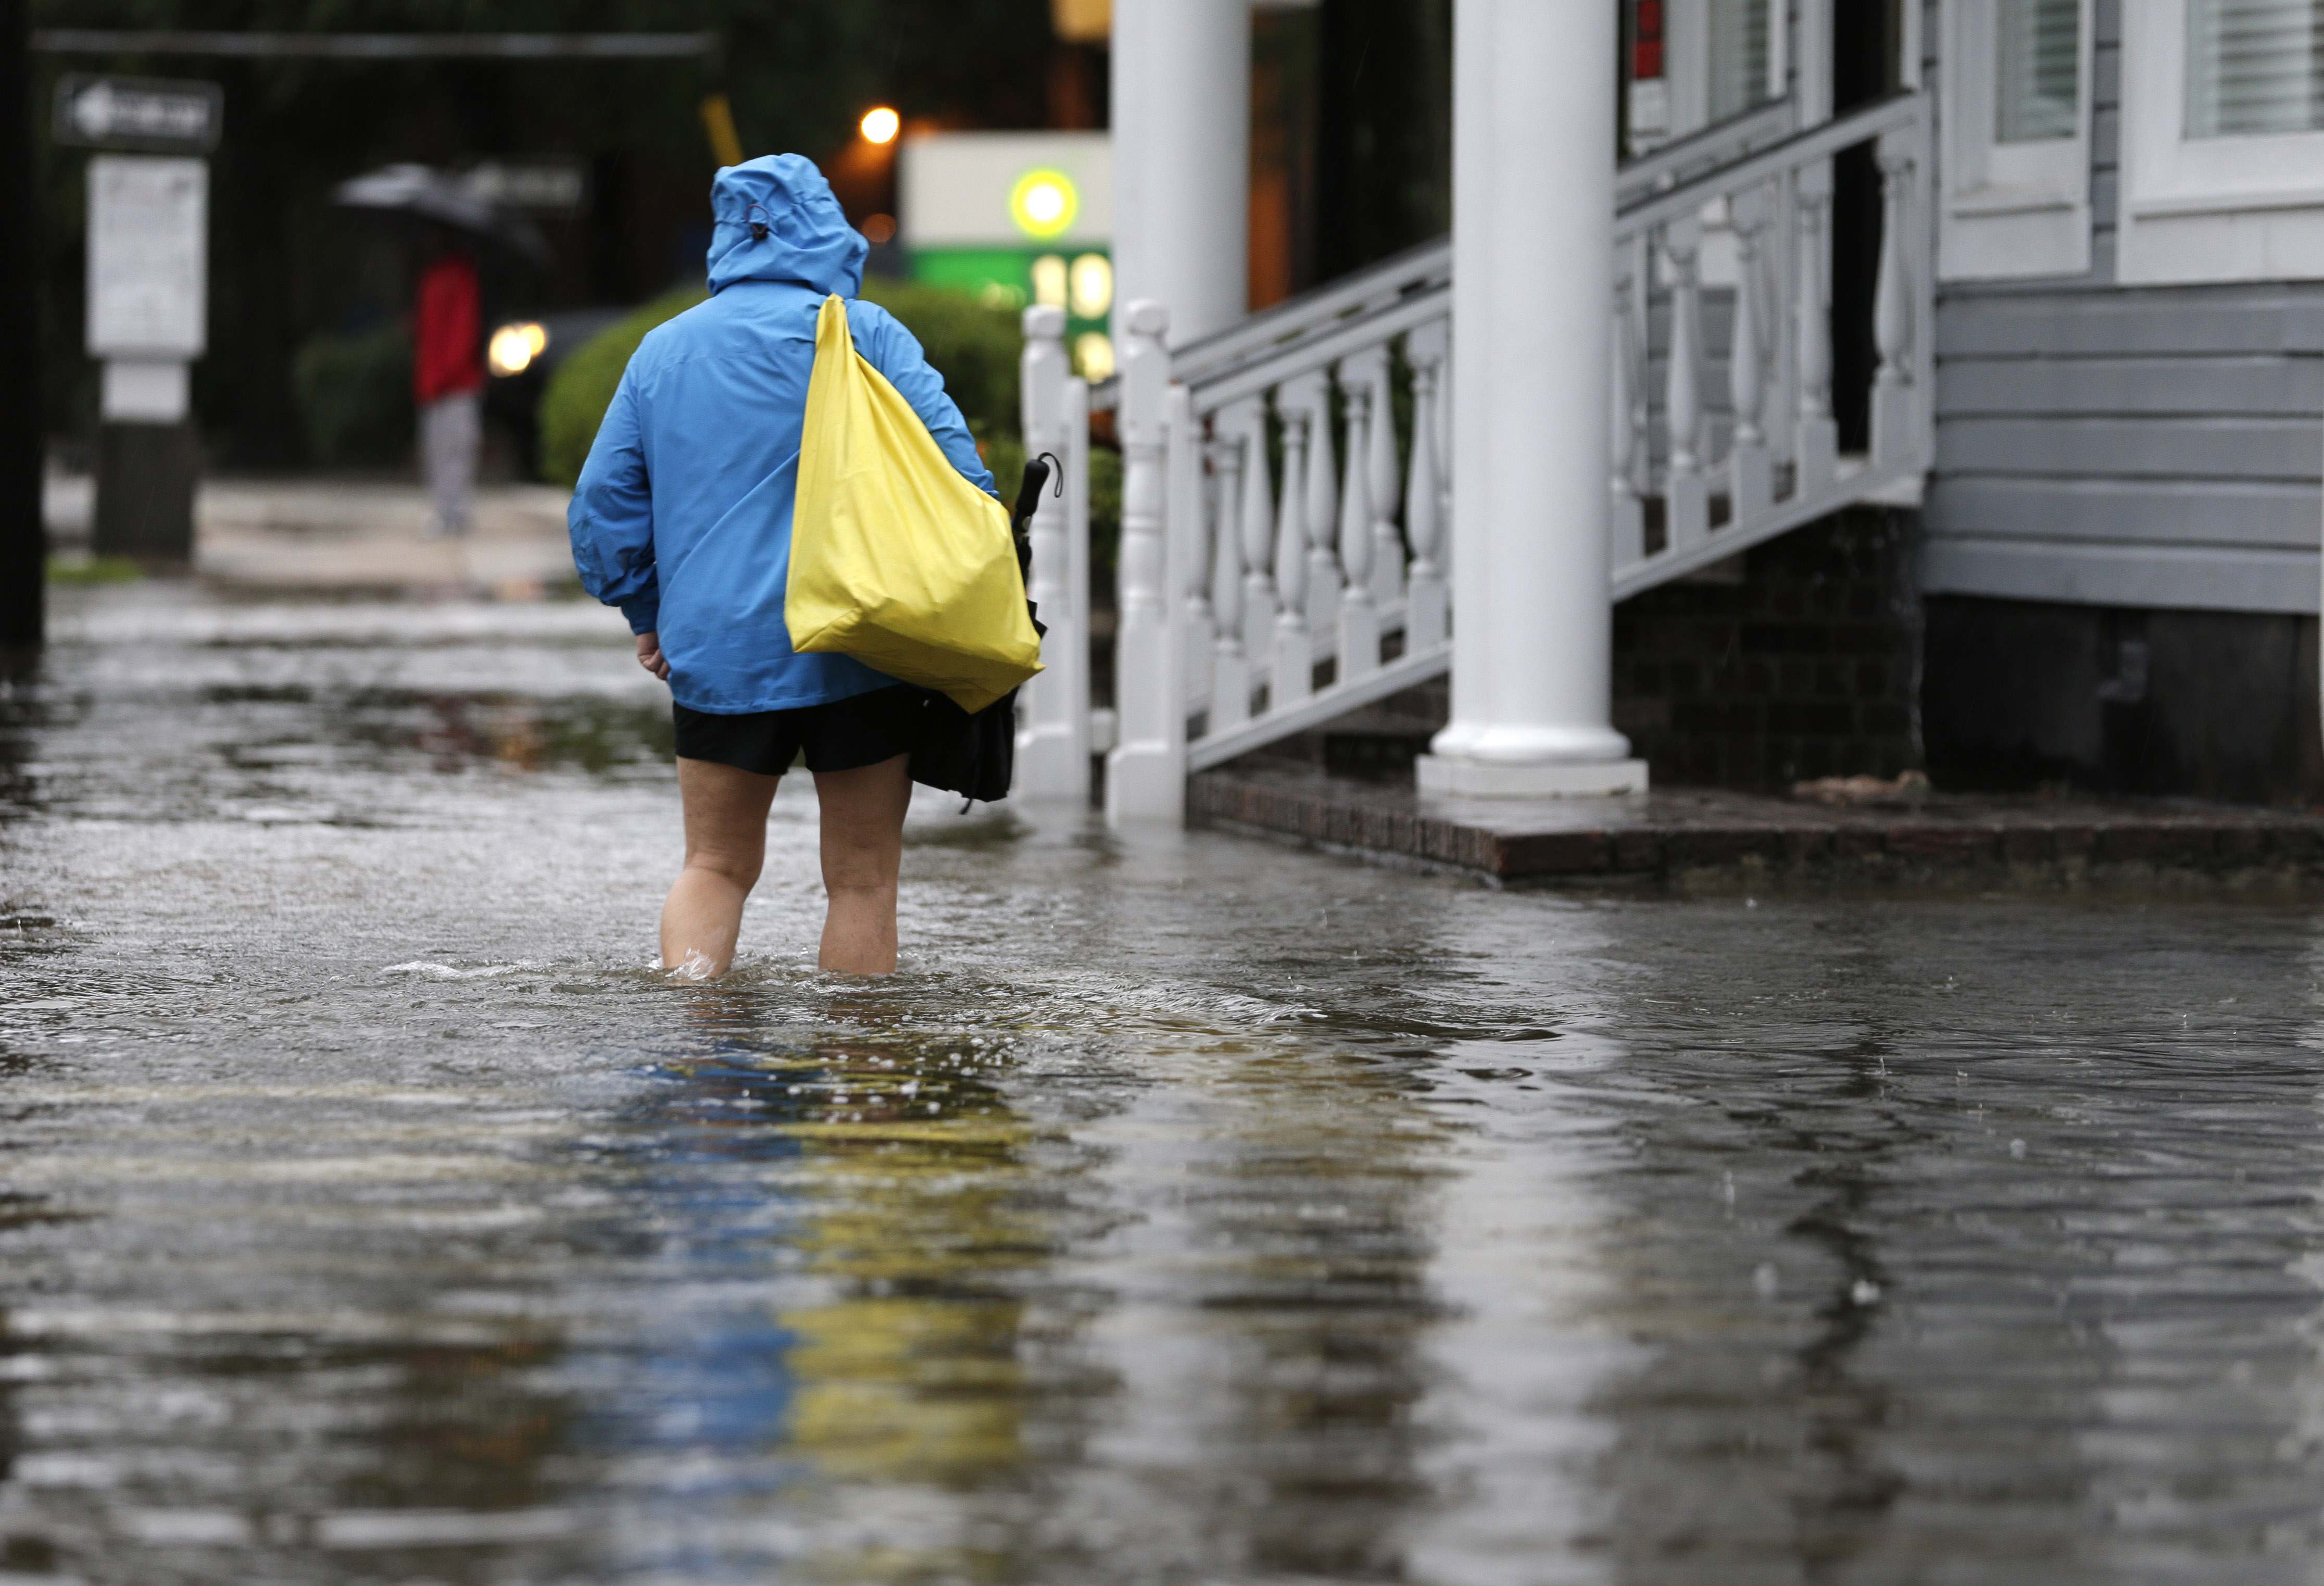 A woman walks down a flooded sidewalk toward an open convenience store in Charleston, S.C., Sunday, Oct. 4, 2015.